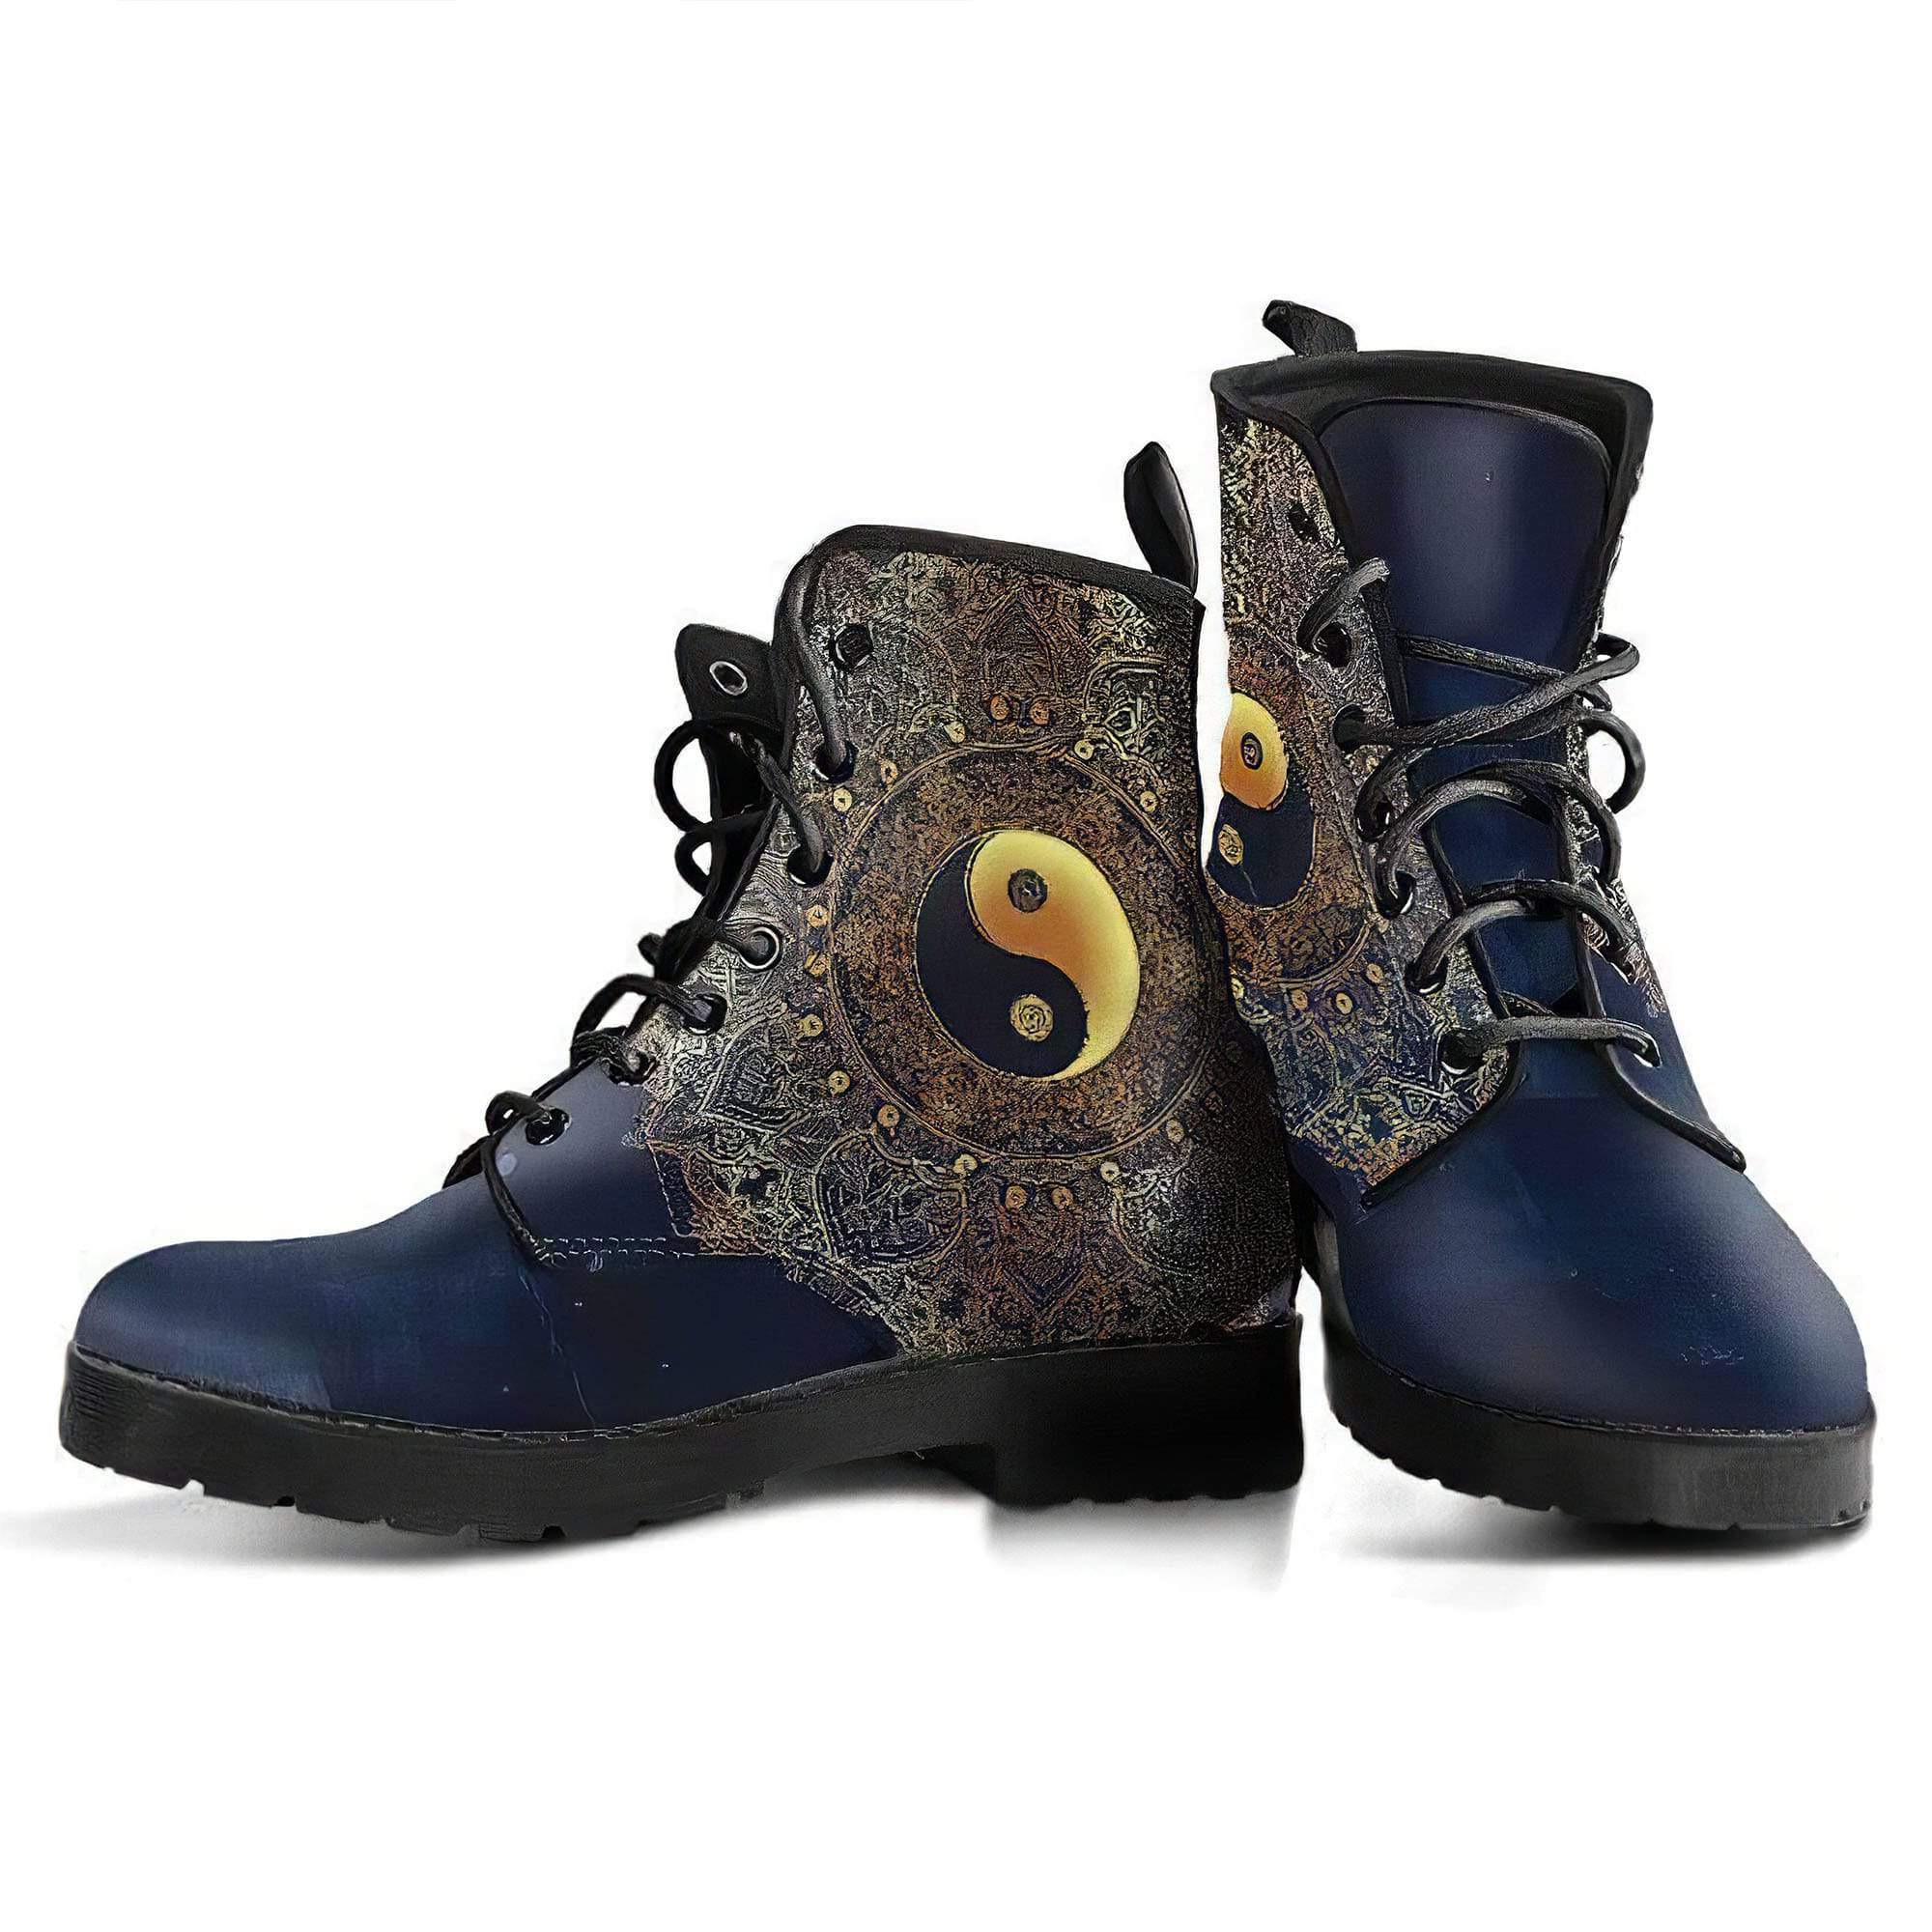 yinyang-mandala-4-handcrafted-boots-women-s-leather-boots-12051984154685.jpg